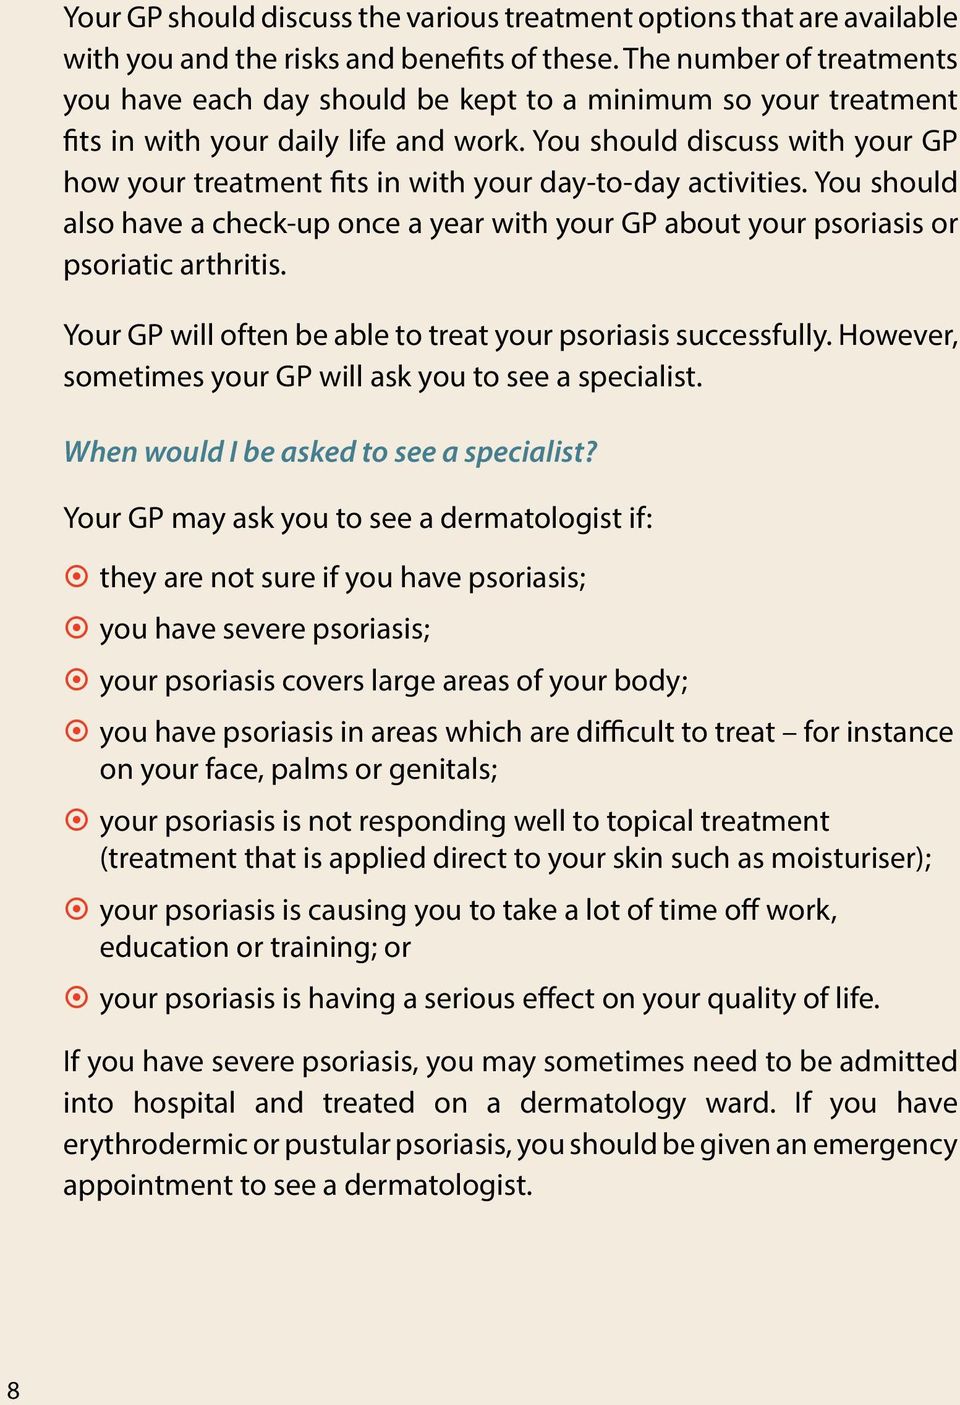 You should discuss with your GP how your treatment fits in with your day-to-day activities. You should also have a check-up once a year with your GP about your psoriasis or psoriatic arthritis.